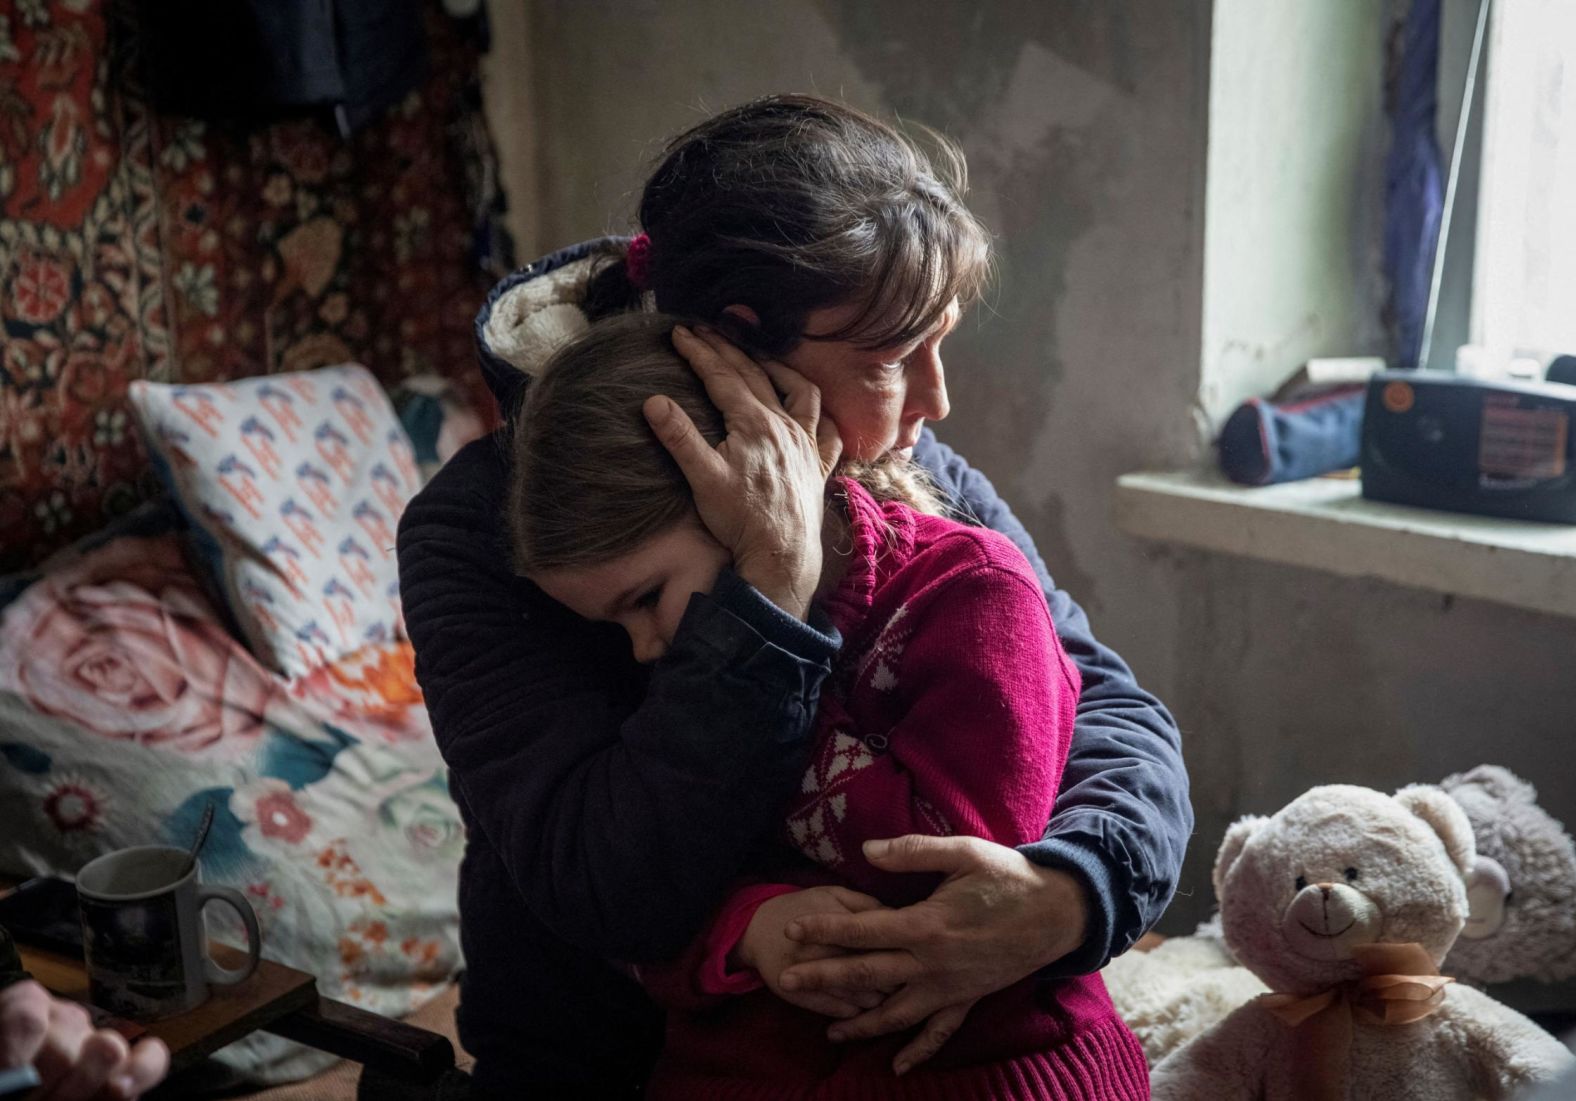 A woman named Olha hugs her 6-year-old granddaughter, Arina, and says goodbye before evacuating the Ukrainian city of Bakhmut on Tuesday, January 31. During Russia's war on Ukraine, <a href="index.php?page=&url=https%3A%2F%2Fwww.cnn.com%2F2022%2F12%2F22%2Feurope%2Fukraine-zelensky-bakhmut-us-congress-intl%2Findex.html" target="_blank">the city of Bakhmut</a> has been regularly referred to as the most contested and kinetic part of the front line.